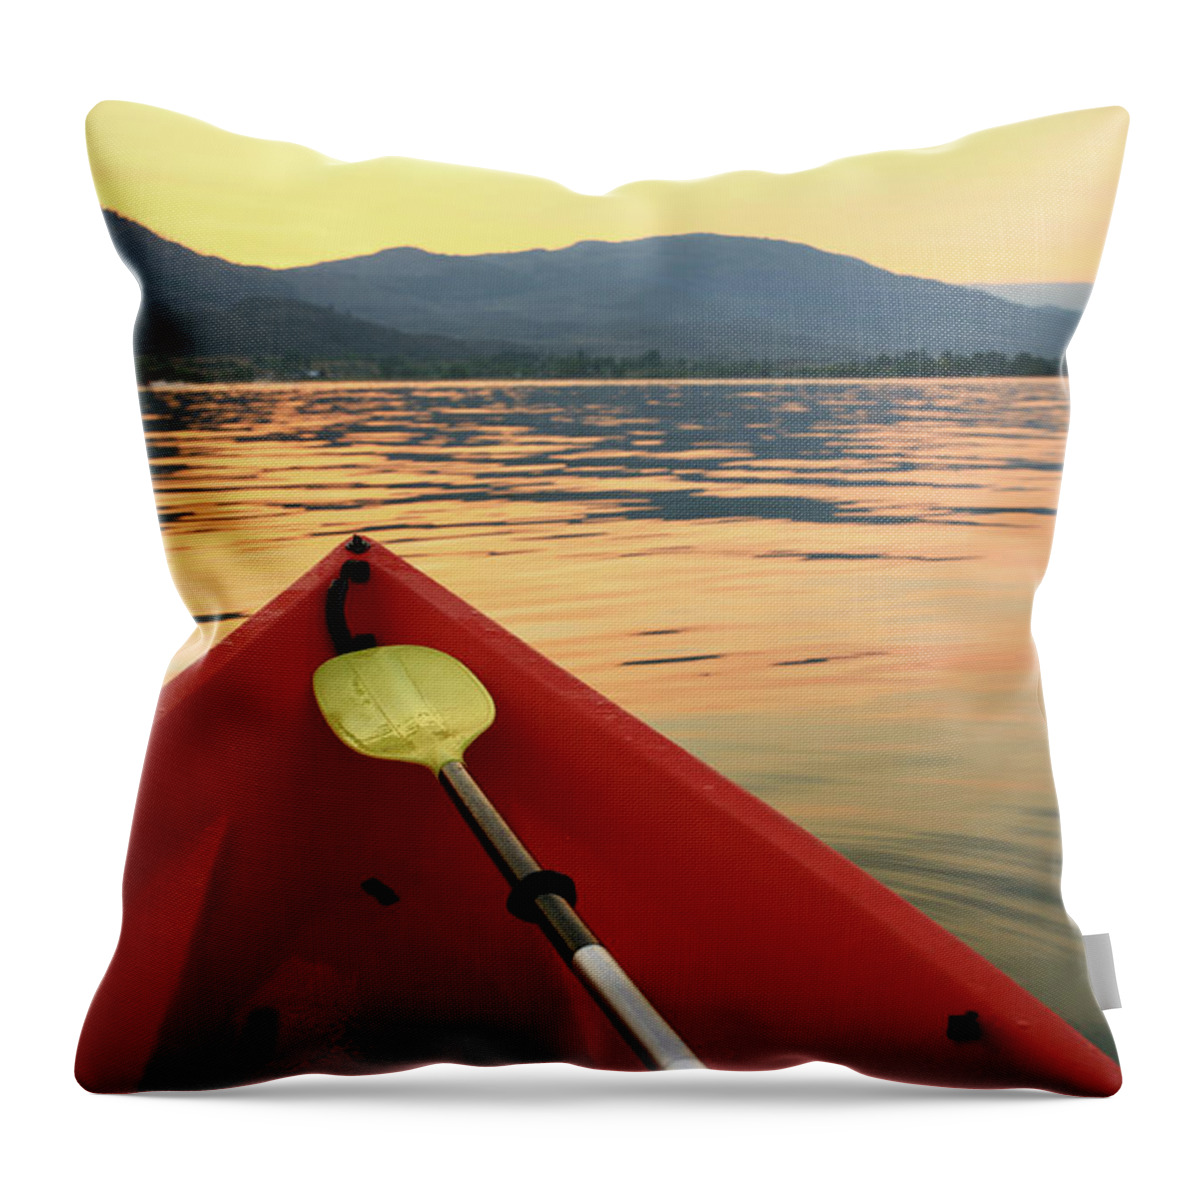 Recreational Pursuit Throw Pillow featuring the photograph Red Canoe On A Beautiful Mountain Lake by Imaginegolf